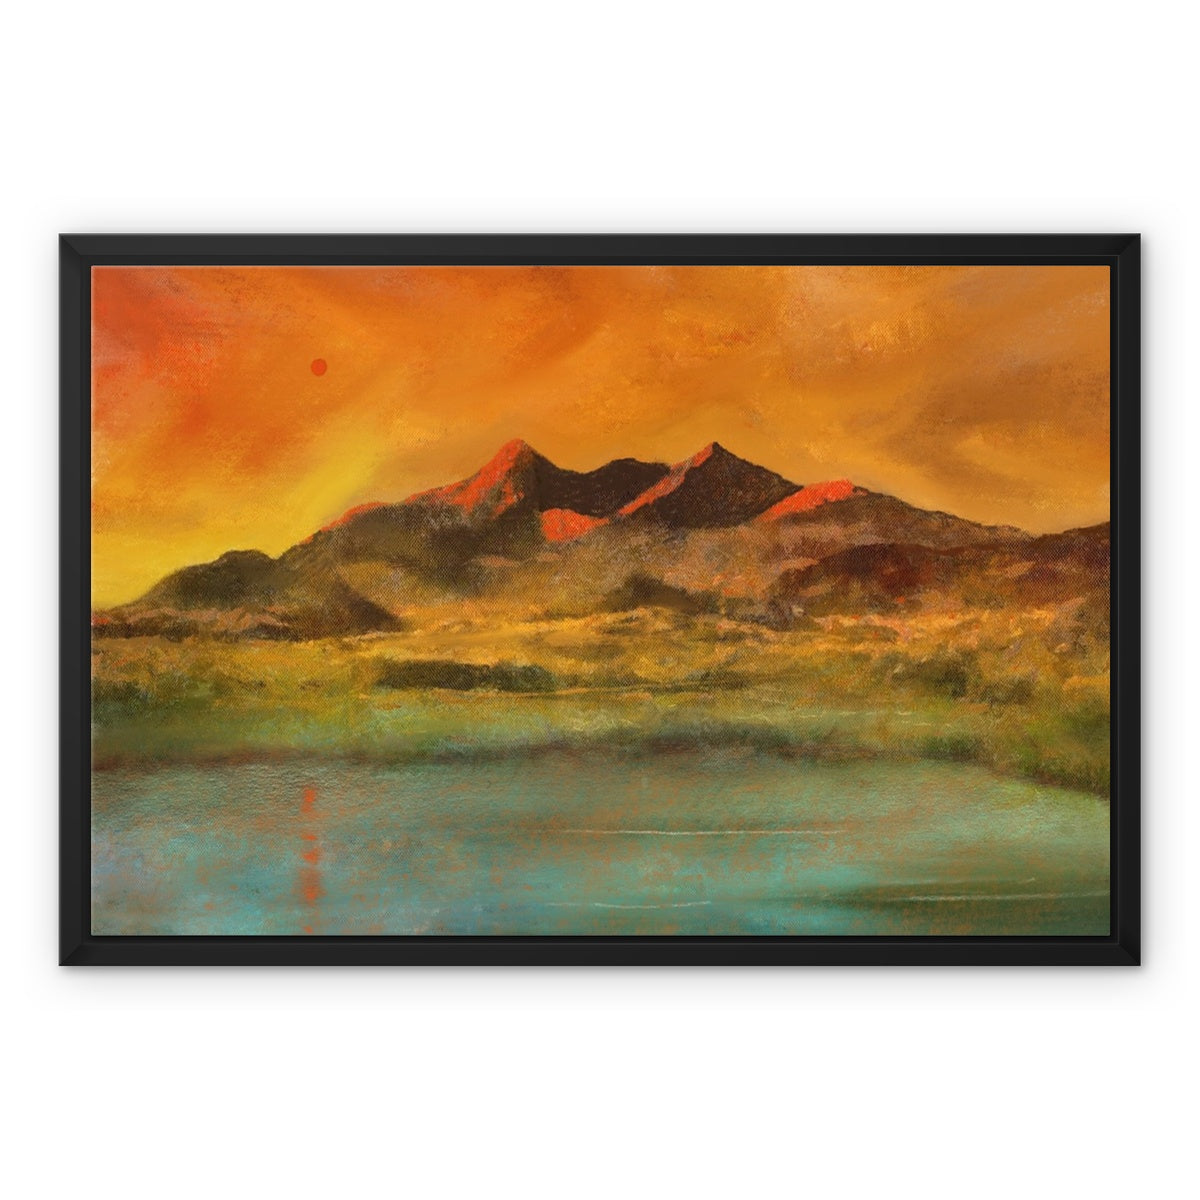 Skye Red Moon Cuilling Painting | Framed Canvas From Scotland-Floating Framed Canvas Prints-Skye Art Gallery-24"x18"-Black Frame-Paintings, Prints, Homeware, Art Gifts From Scotland By Scottish Artist Kevin Hunter